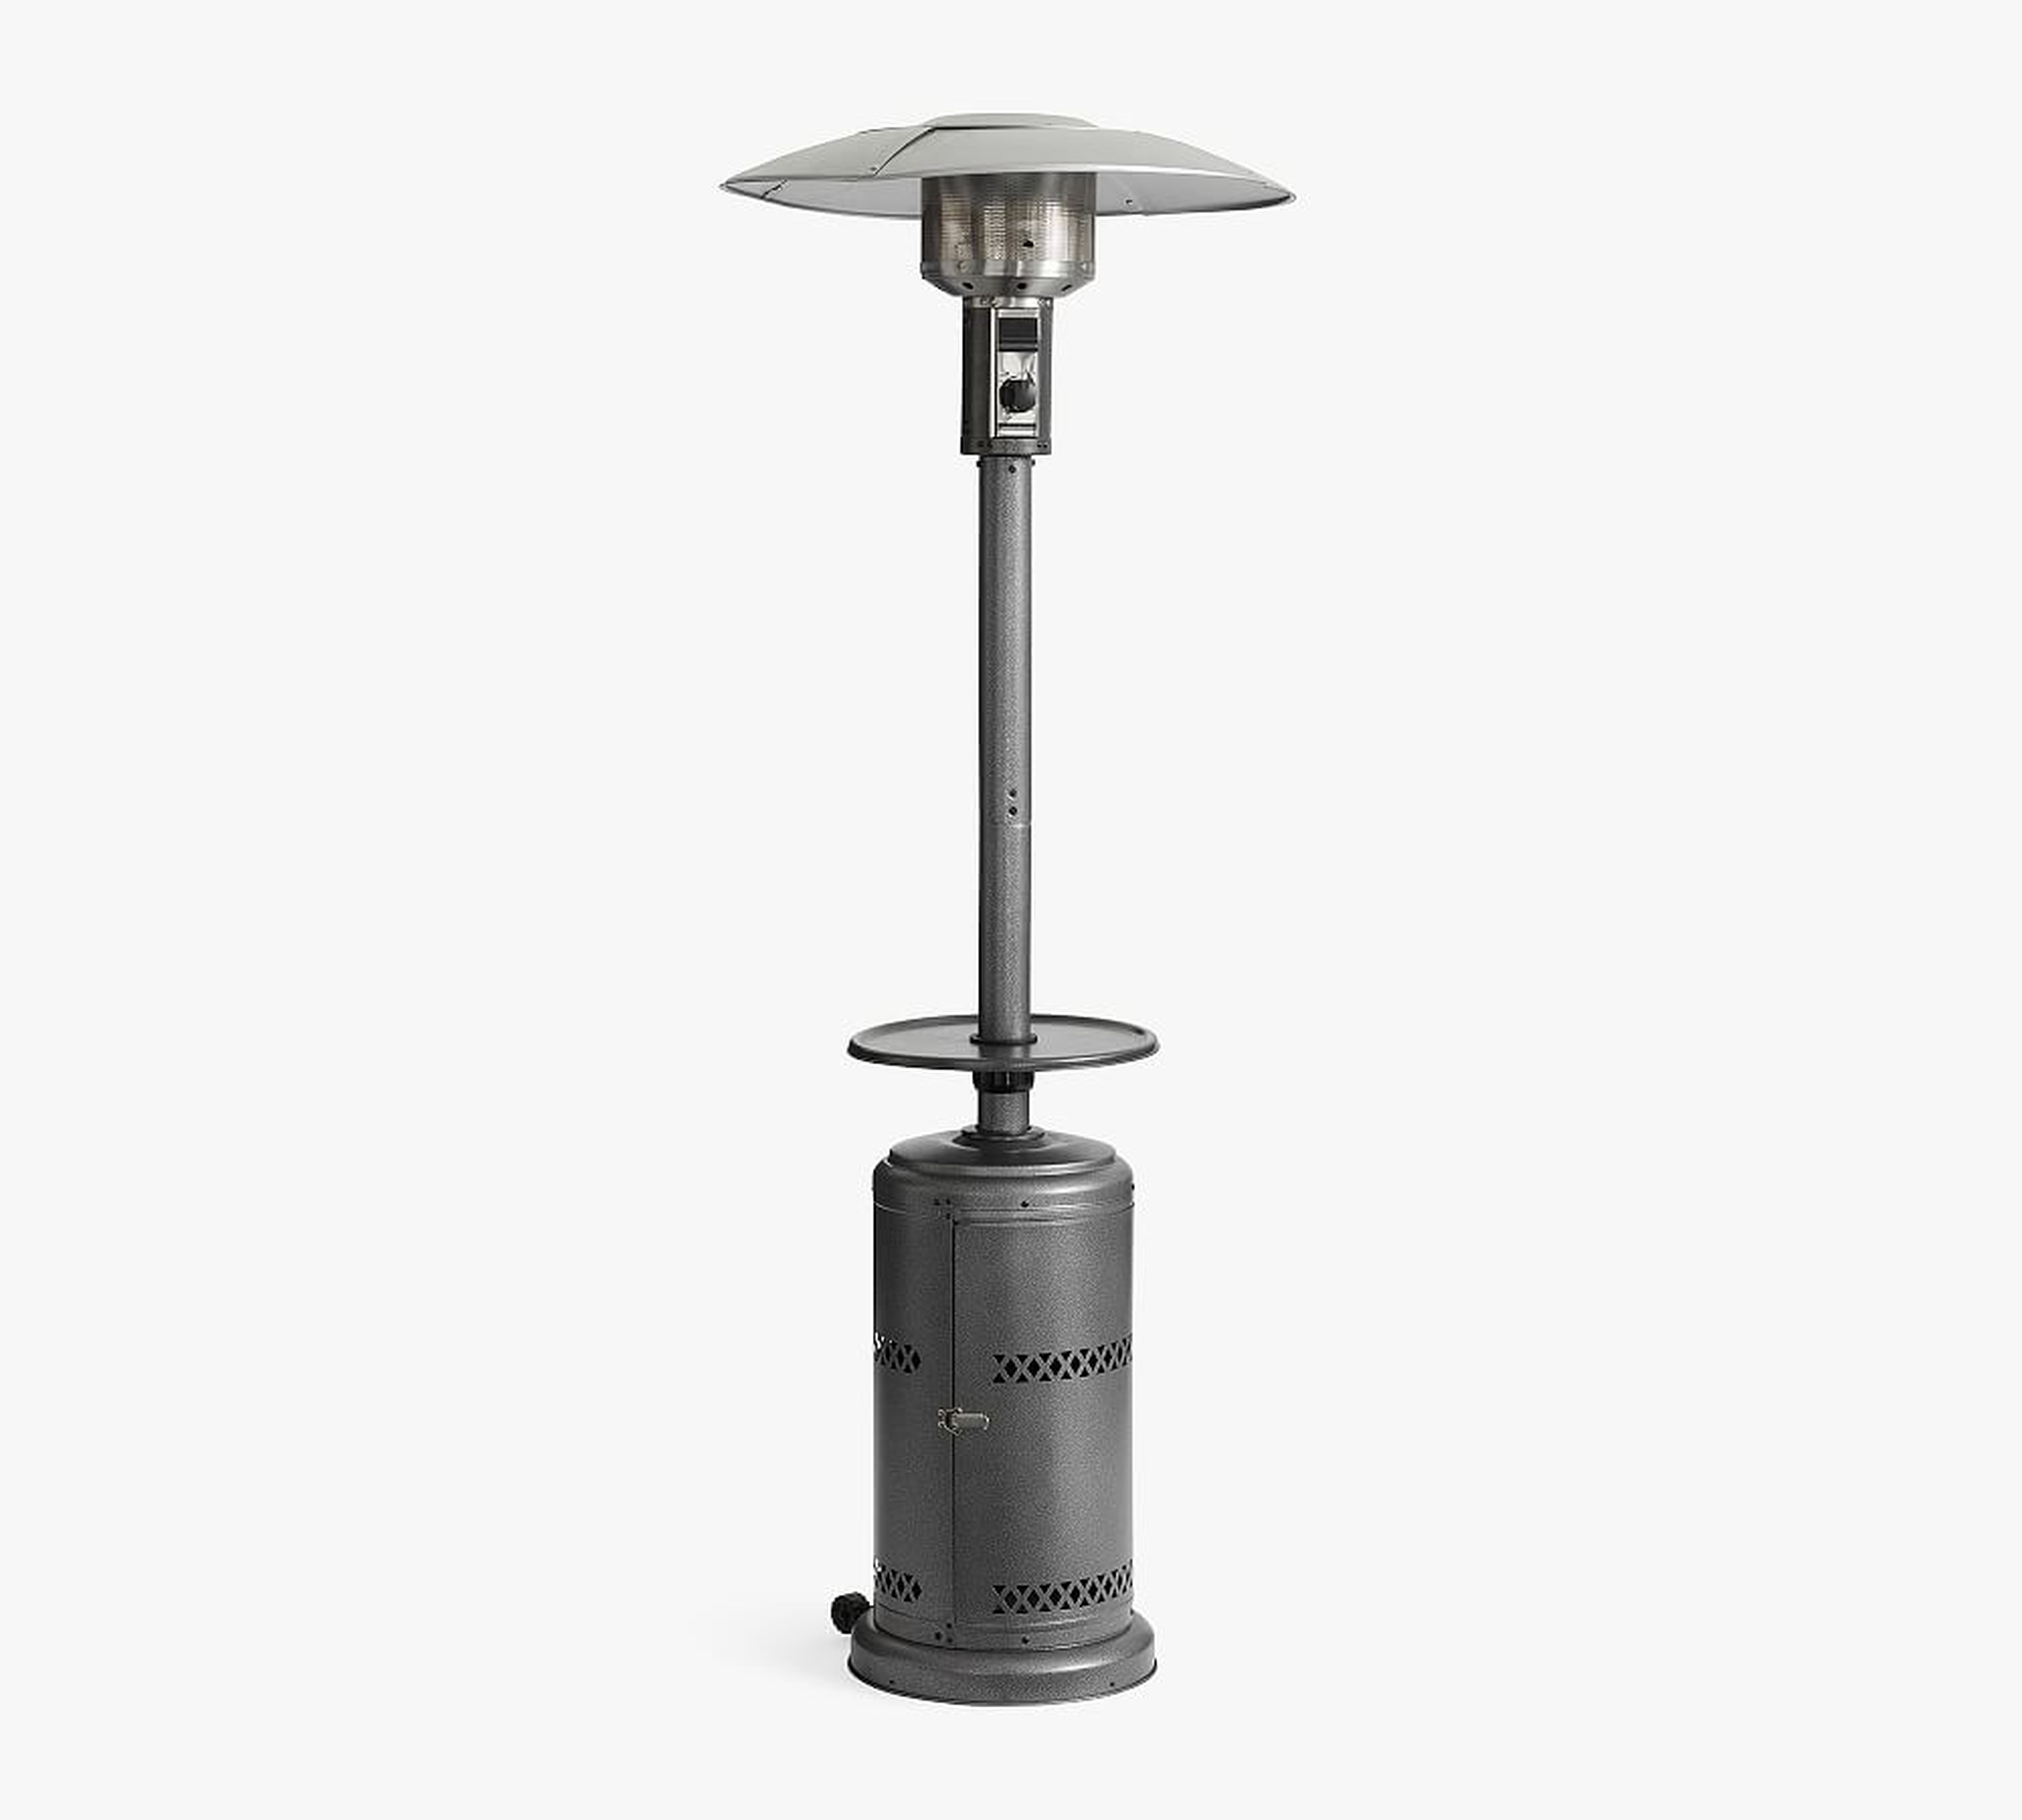 Standing Natural Gas Outdoor Heater, Silver - Pottery Barn